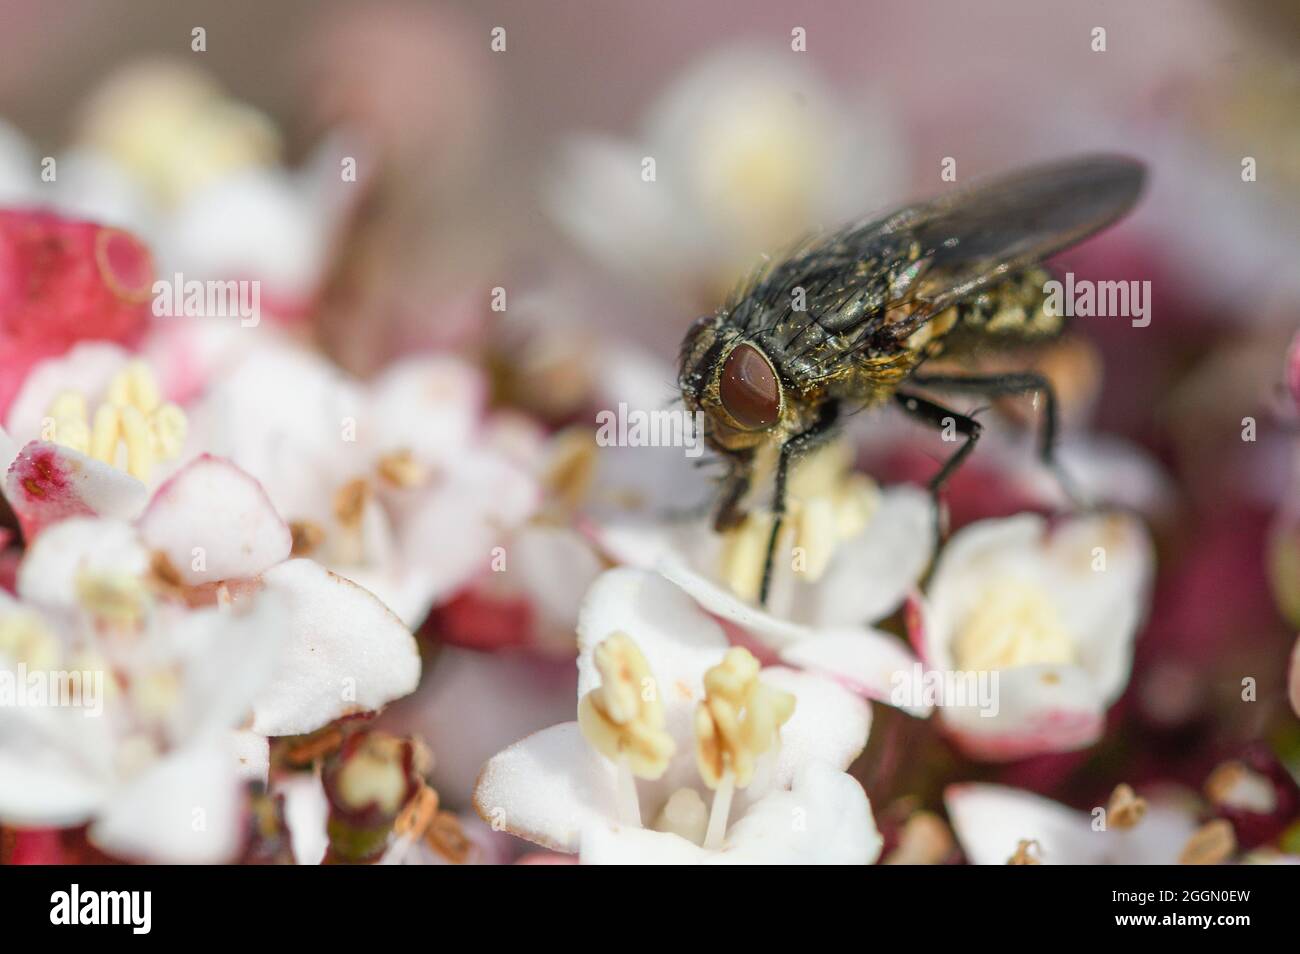 Fly feeding on viburnum tinus flowers, with pollen grains on its body Stock Photo